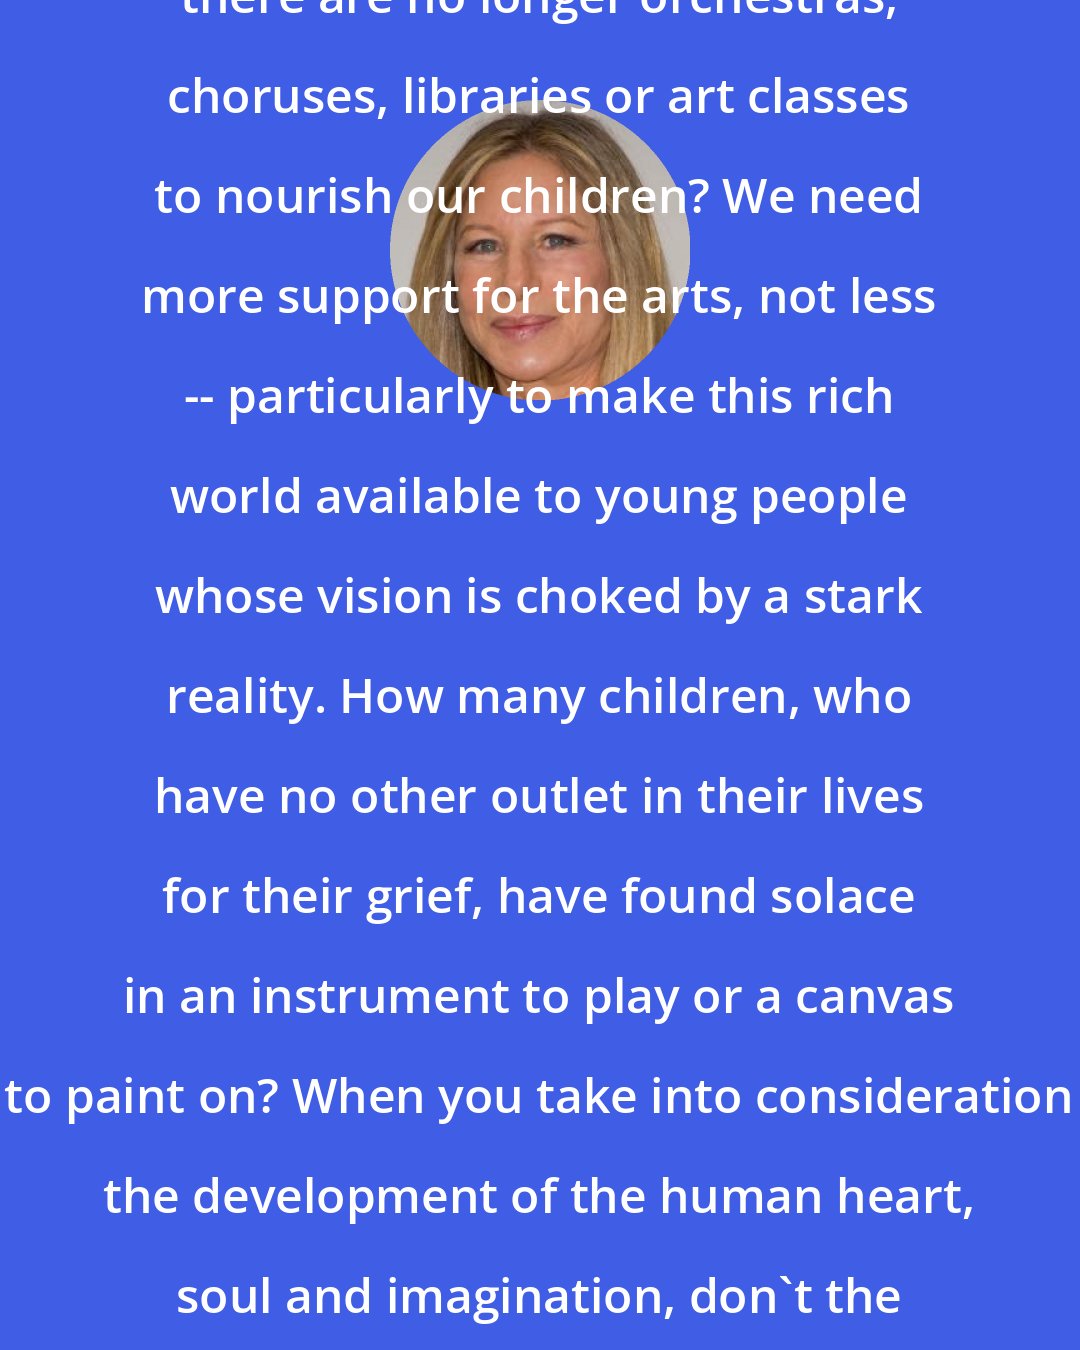 Barbra Streisand: How can we accept a situation in which there are no longer orchestras, choruses, libraries or art classes to nourish our children? We need more support for the arts, not less -- particularly to make this rich world available to young people whose vision is choked by a stark reality. How many children, who have no other outlet in their lives for their grief, have found solace in an instrument to play or a canvas to paint on? When you take into consideration the development of the human heart, soul and imagination, don't the arts take on just as much importance as math or science?